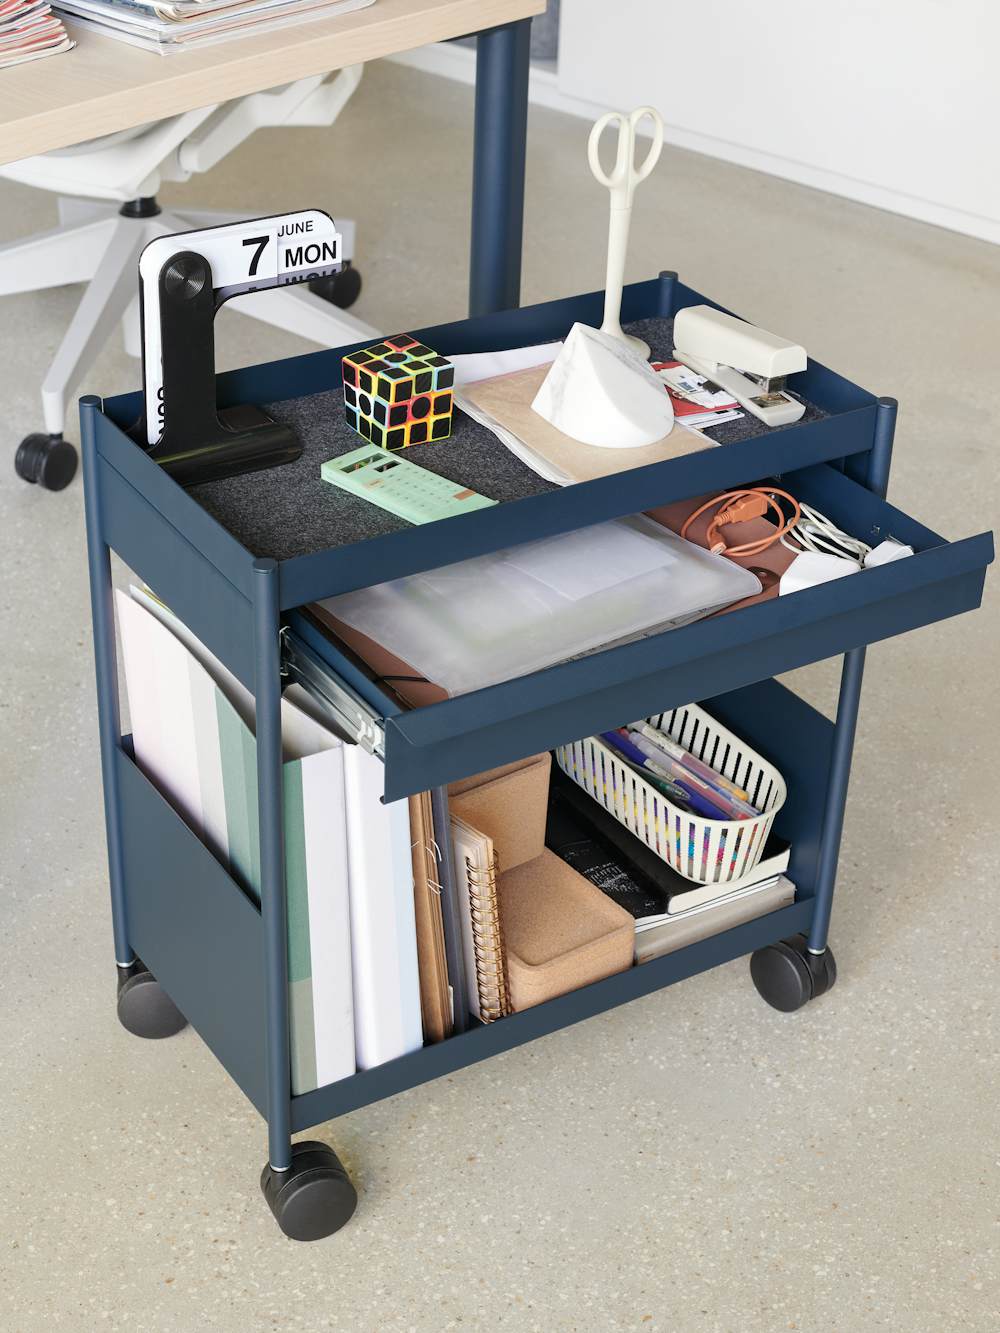 Blue OE1 Storage Trolley with casters in home office setting.